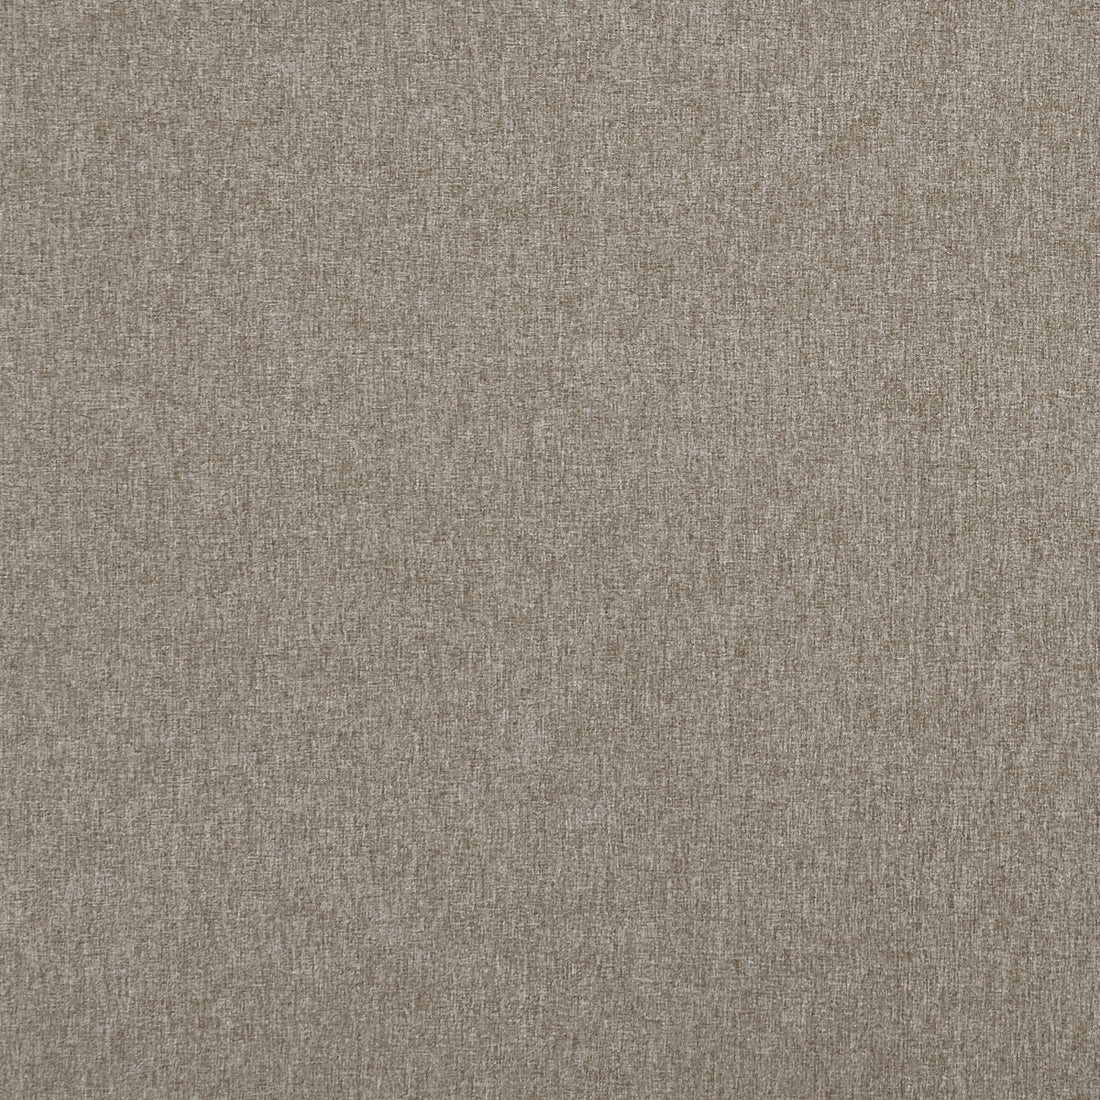 Highlander fabric in latte color - pattern F0848/52.CAC.0 - by Clarke And Clarke in the Clarke &amp; Clarke Highlander 2 collection